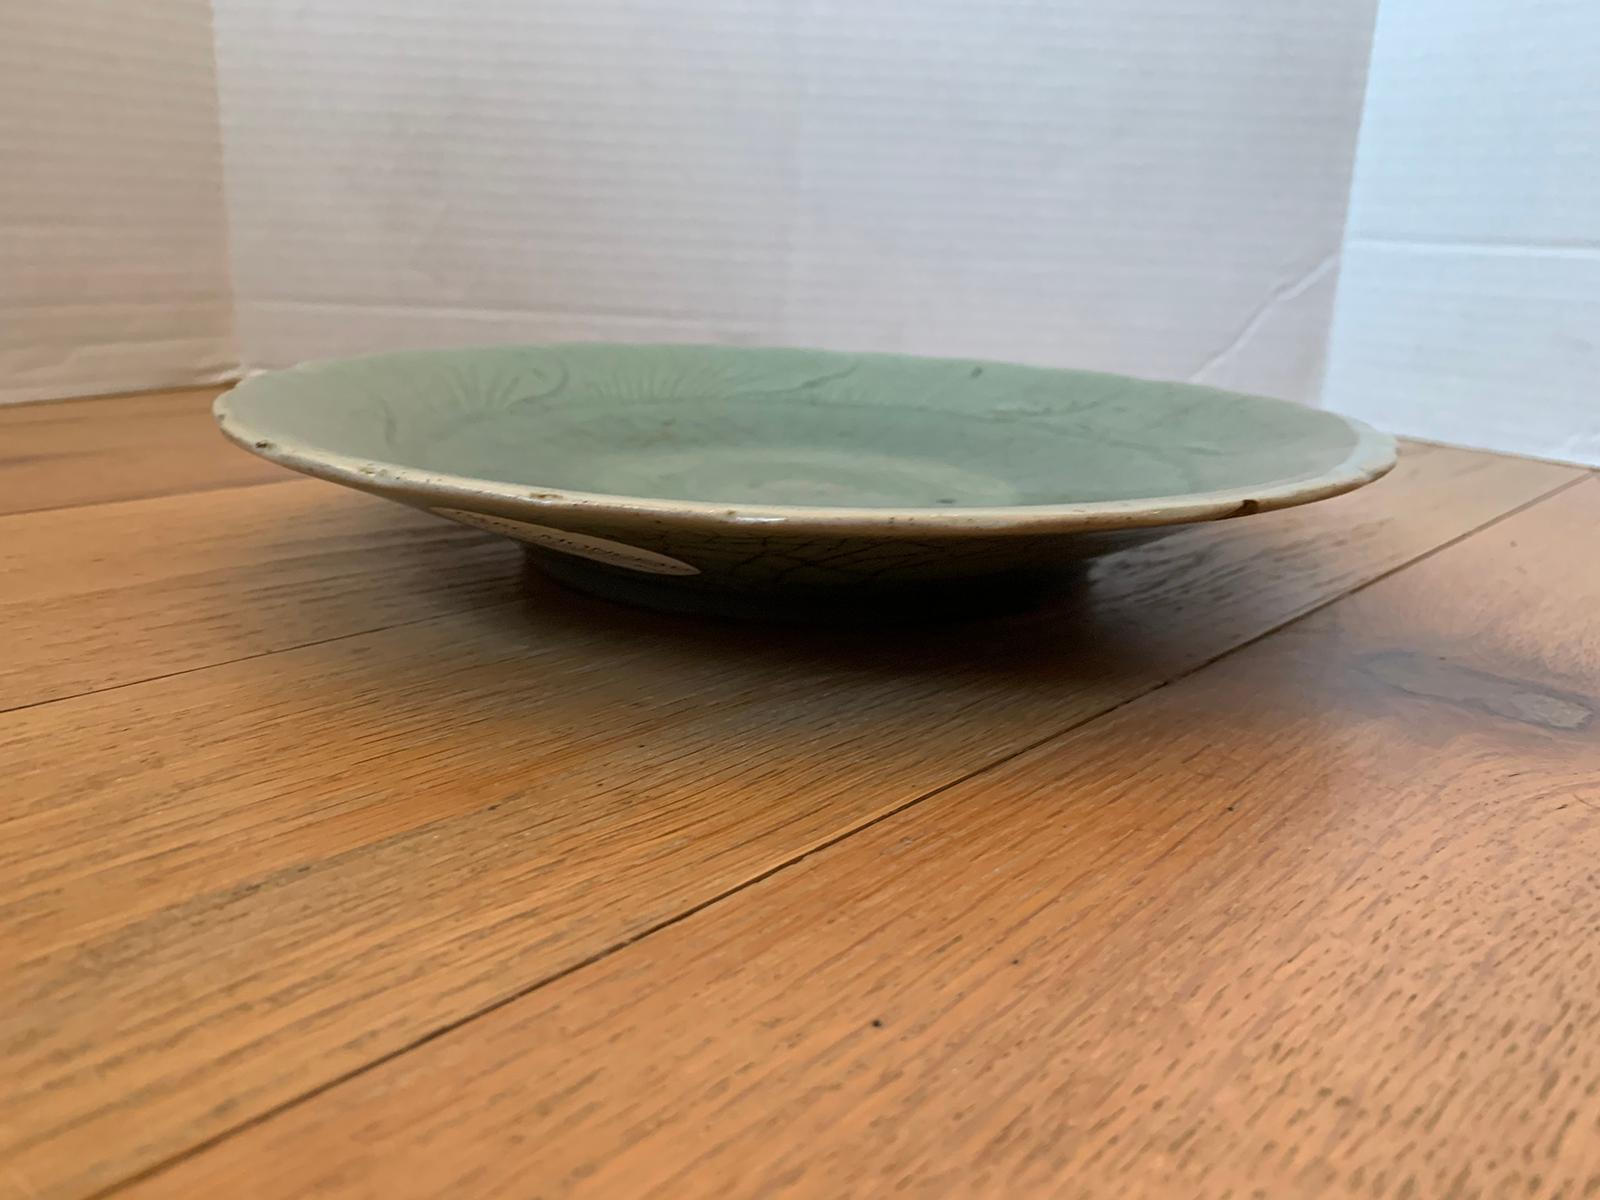 19th-20th Century Chinese Crackle Glazed Celadon Pottery Plate, Unmarked 4